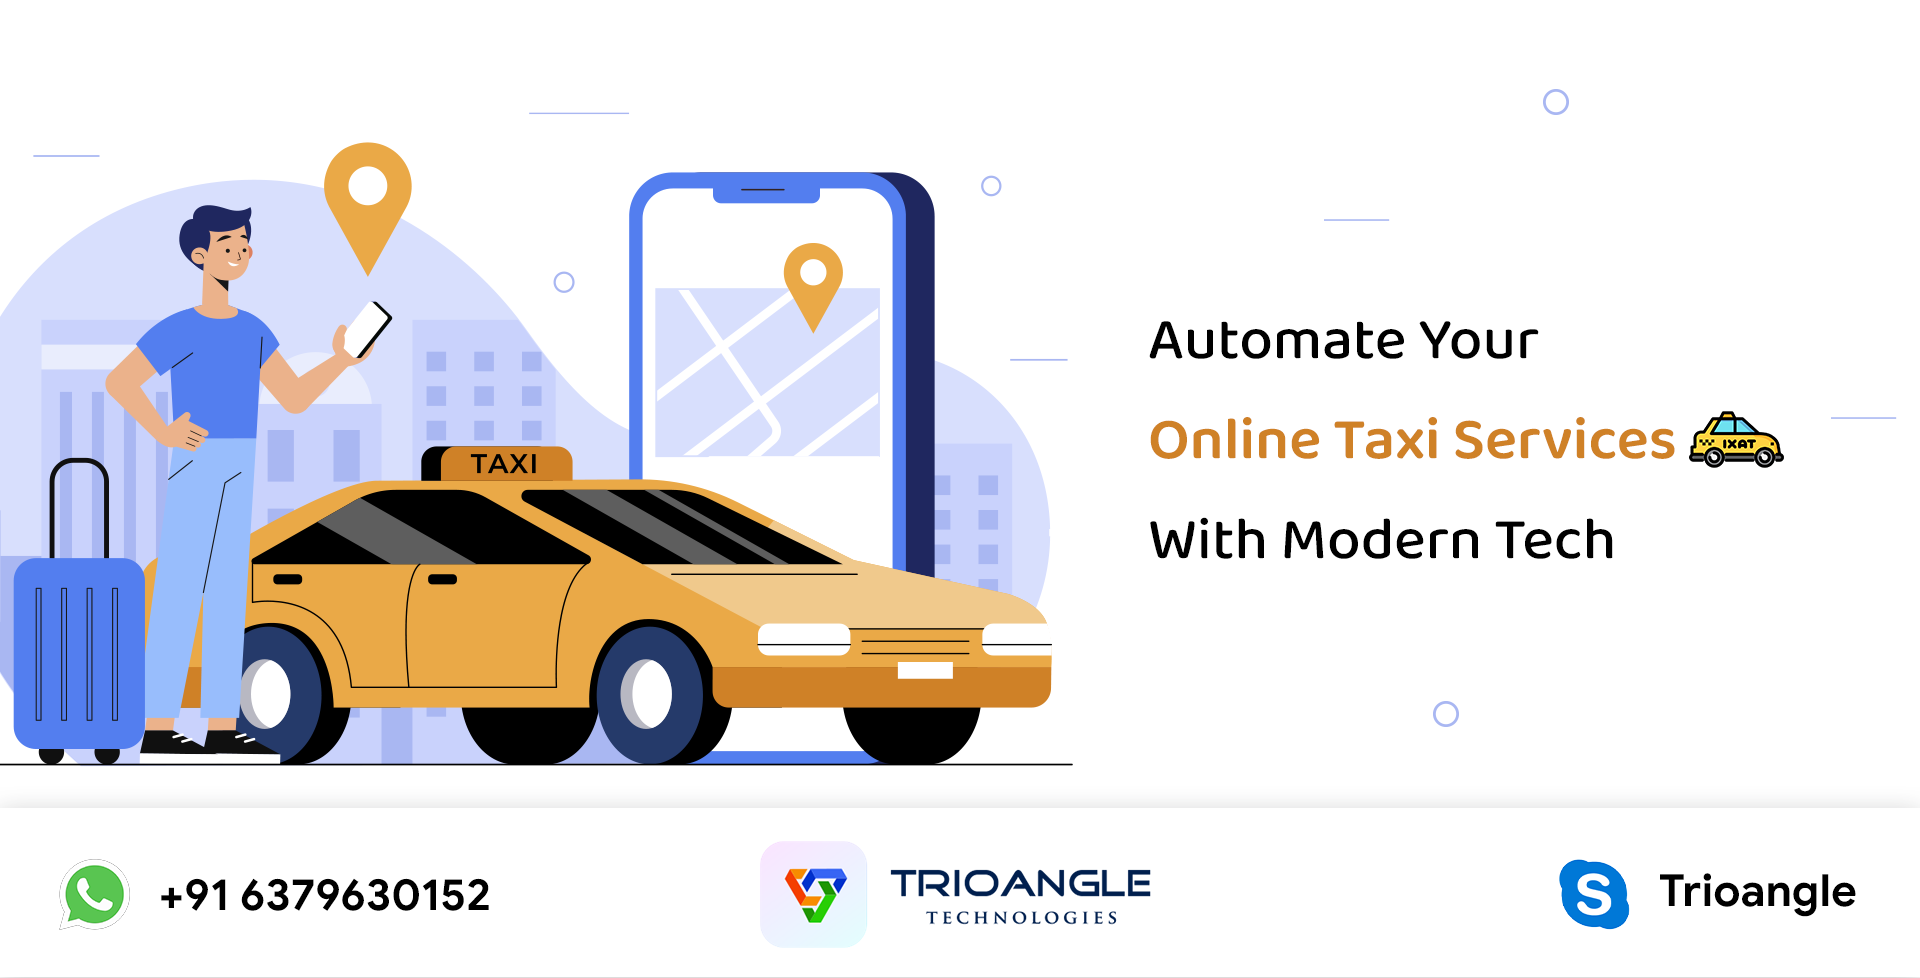 Automate Your Online Taxi Services With Modern Tech